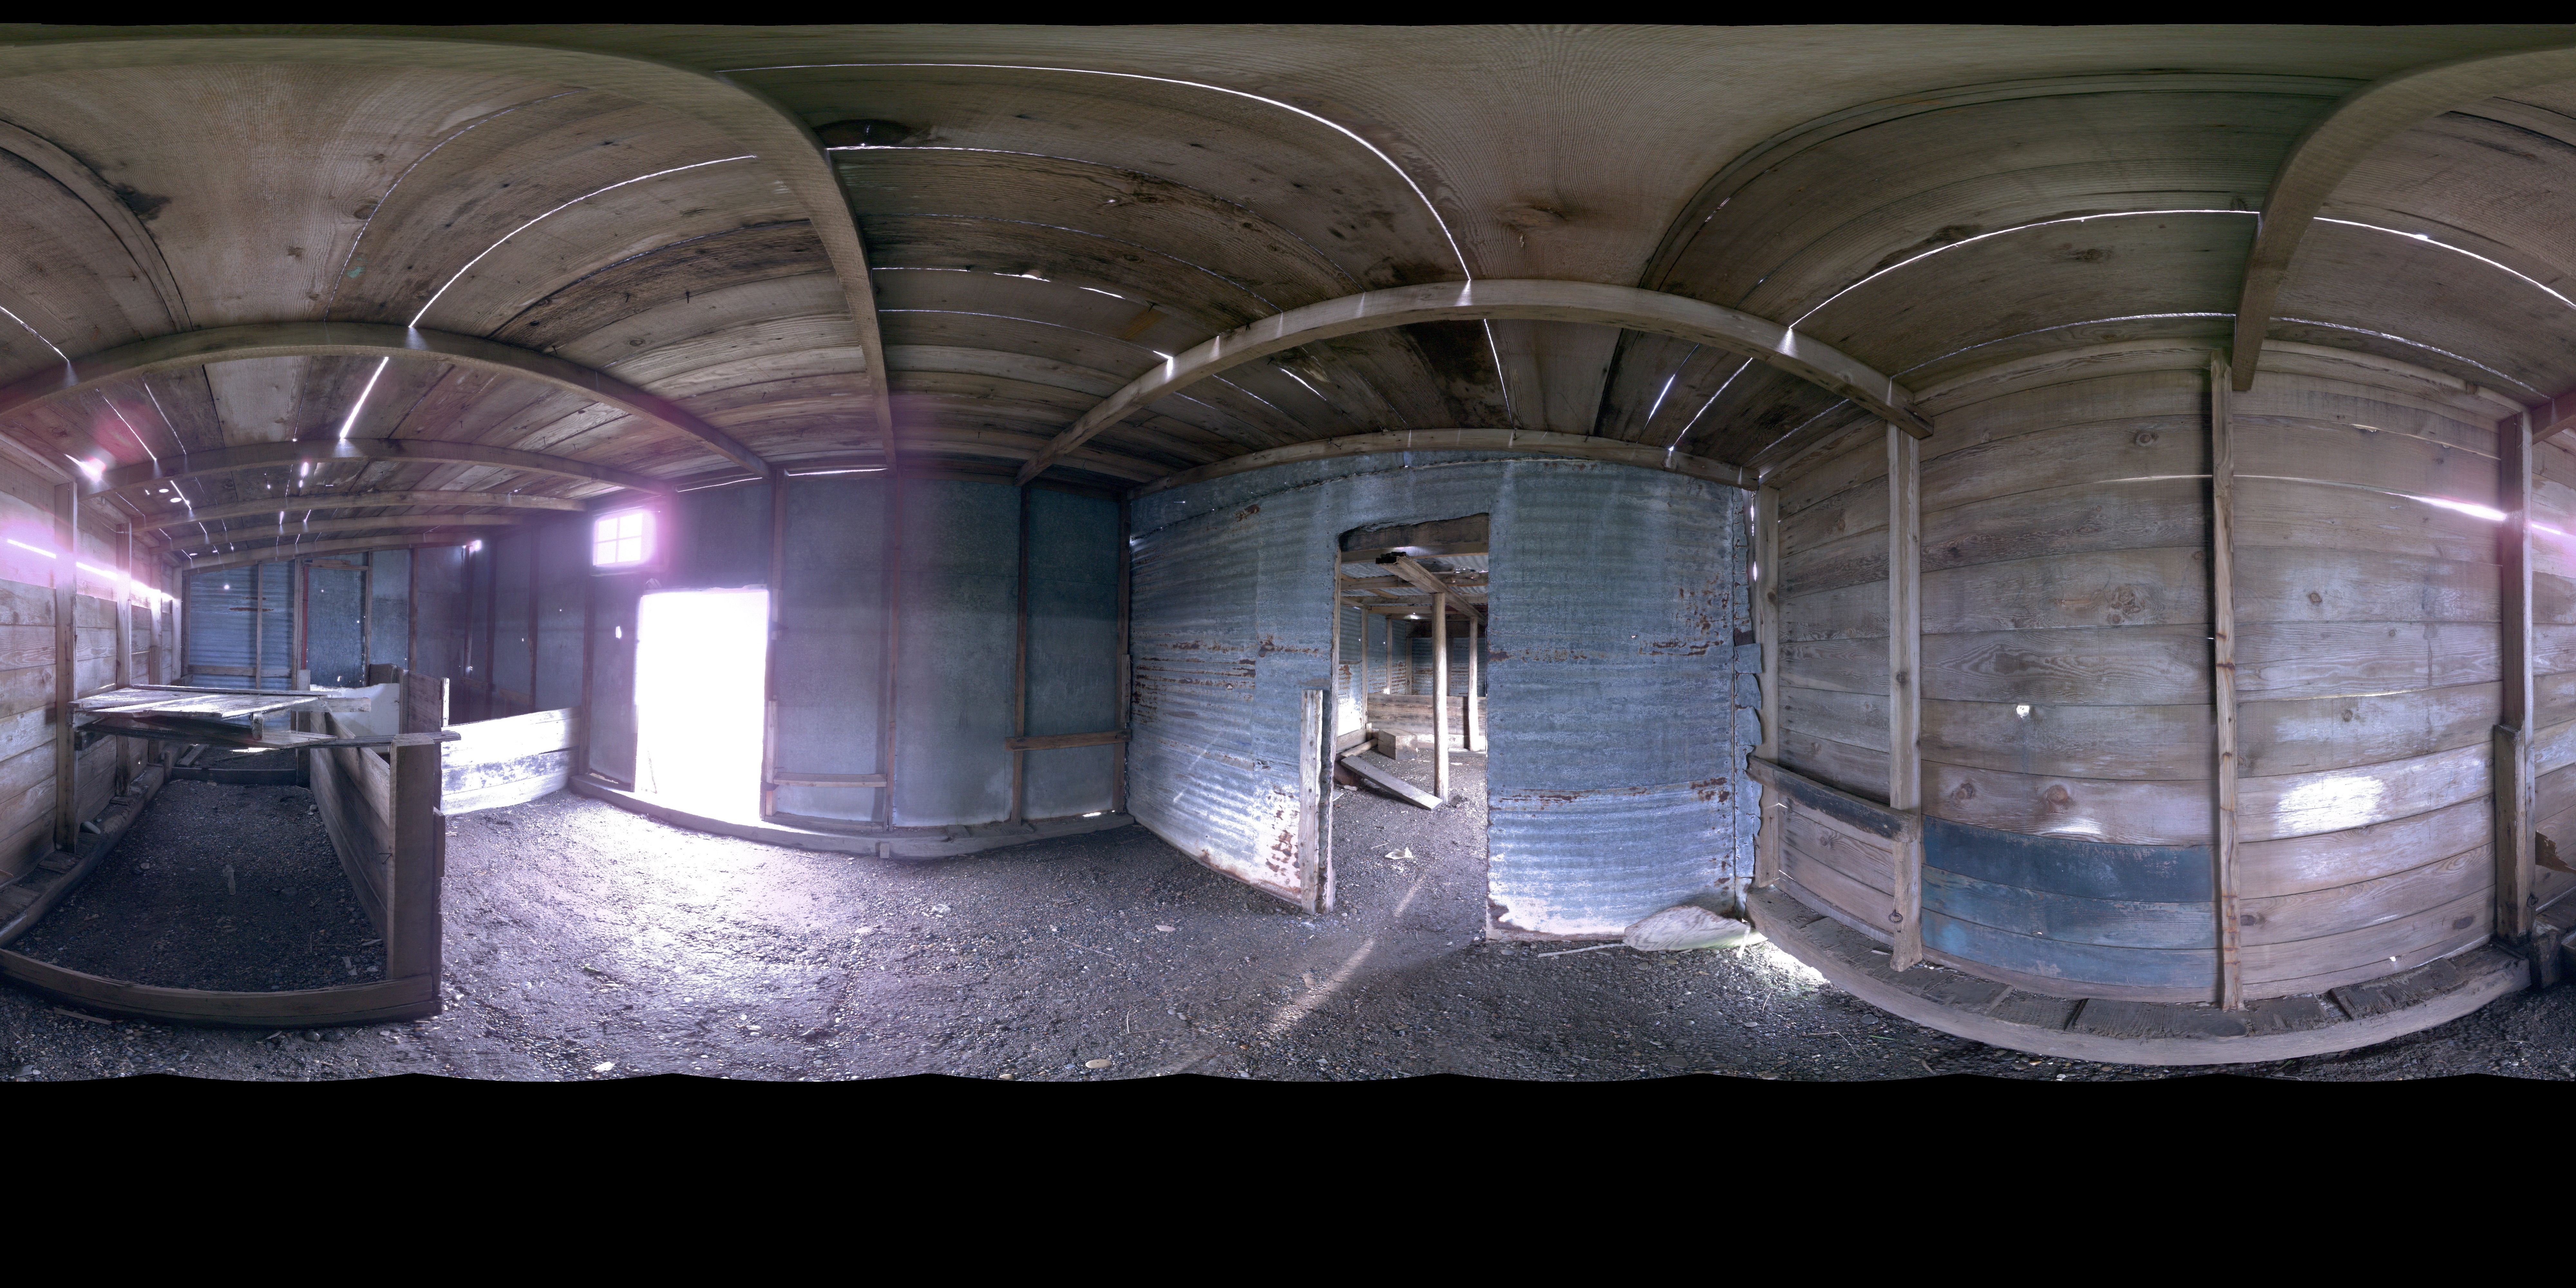 Panoramic view of the RCMP Dog Kennels and Run from the Leica BKL 360, scanning location 4.